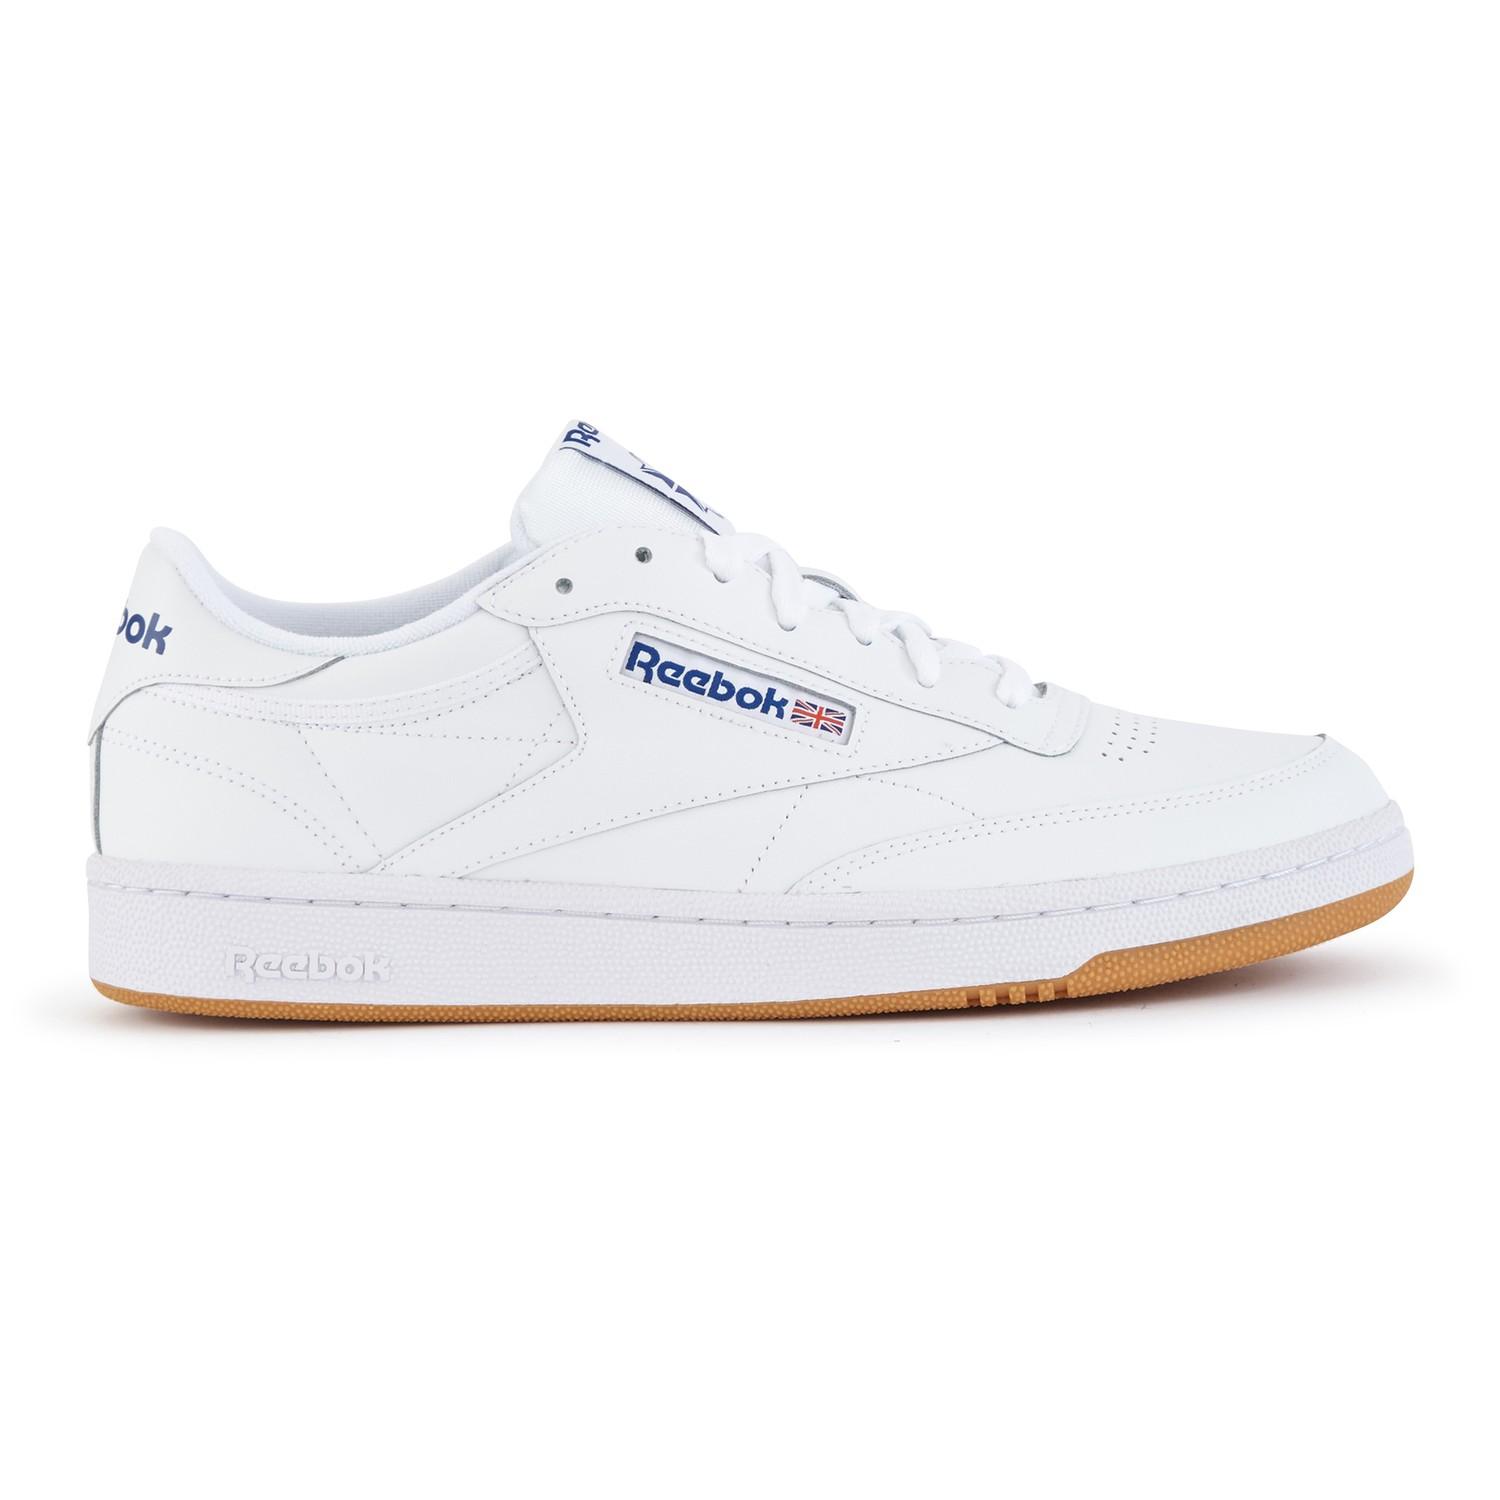 Reebok Club C 85 Trainers in White for Men - Lyst